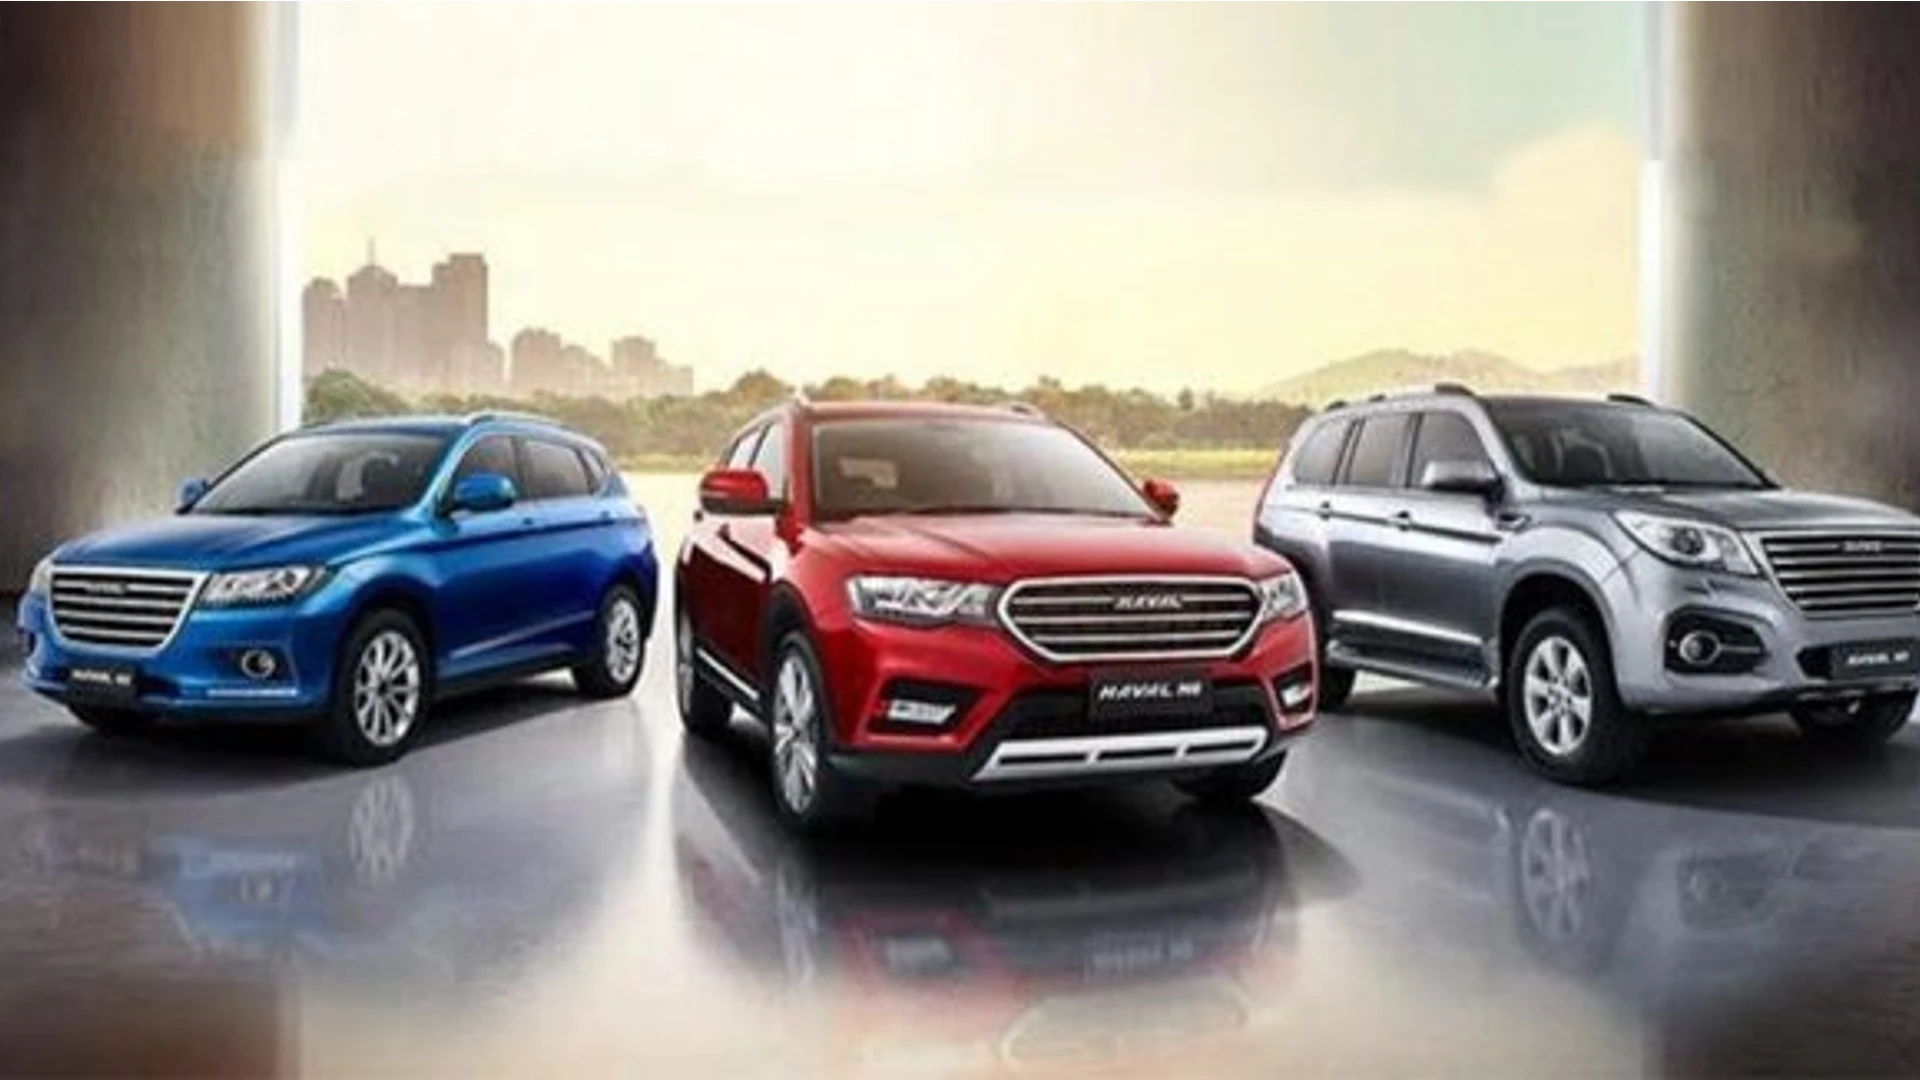 Great Wall Motors Exits India Without A Single Launch, Lays Off Employees